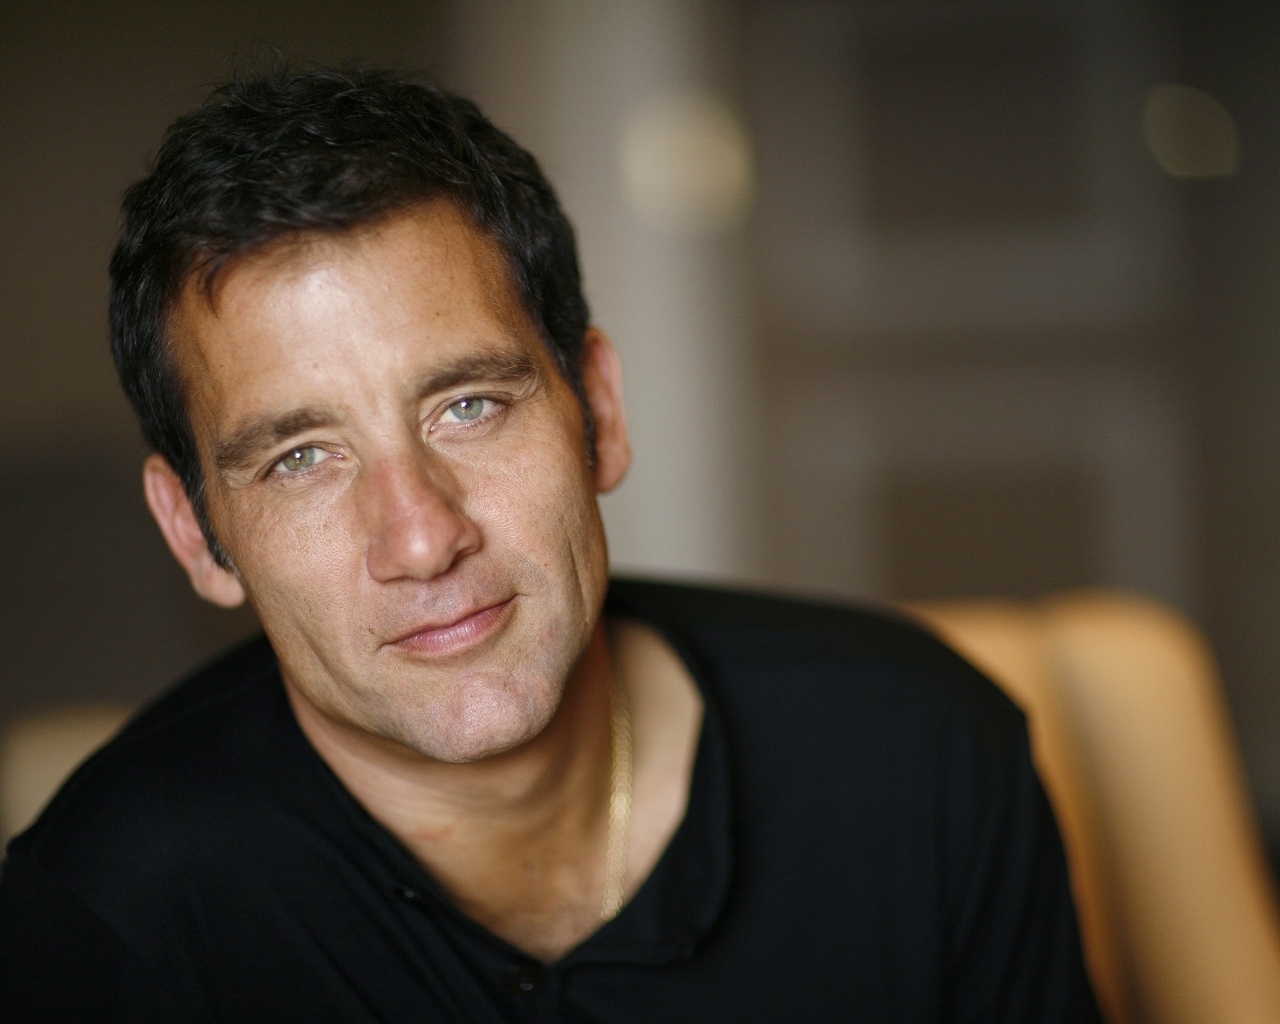 Clive Owen Smile for 1280 x 1024 resolution